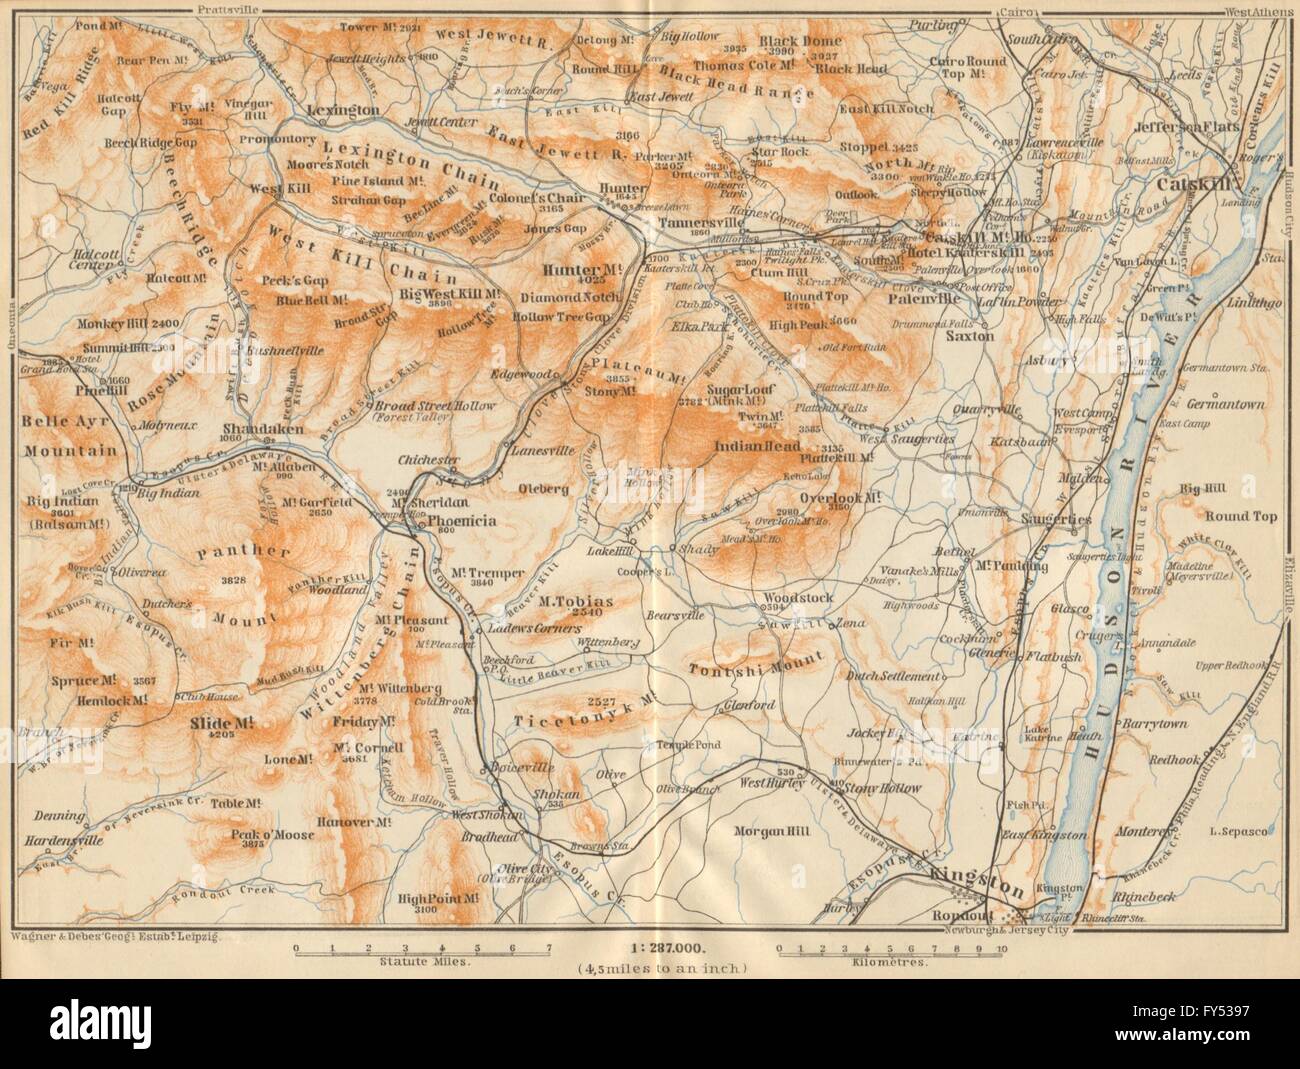 THE CATSKILL MOUNTAINS . New York State. Hudson River. BAEDEKER, 1904 old map Stock Photo